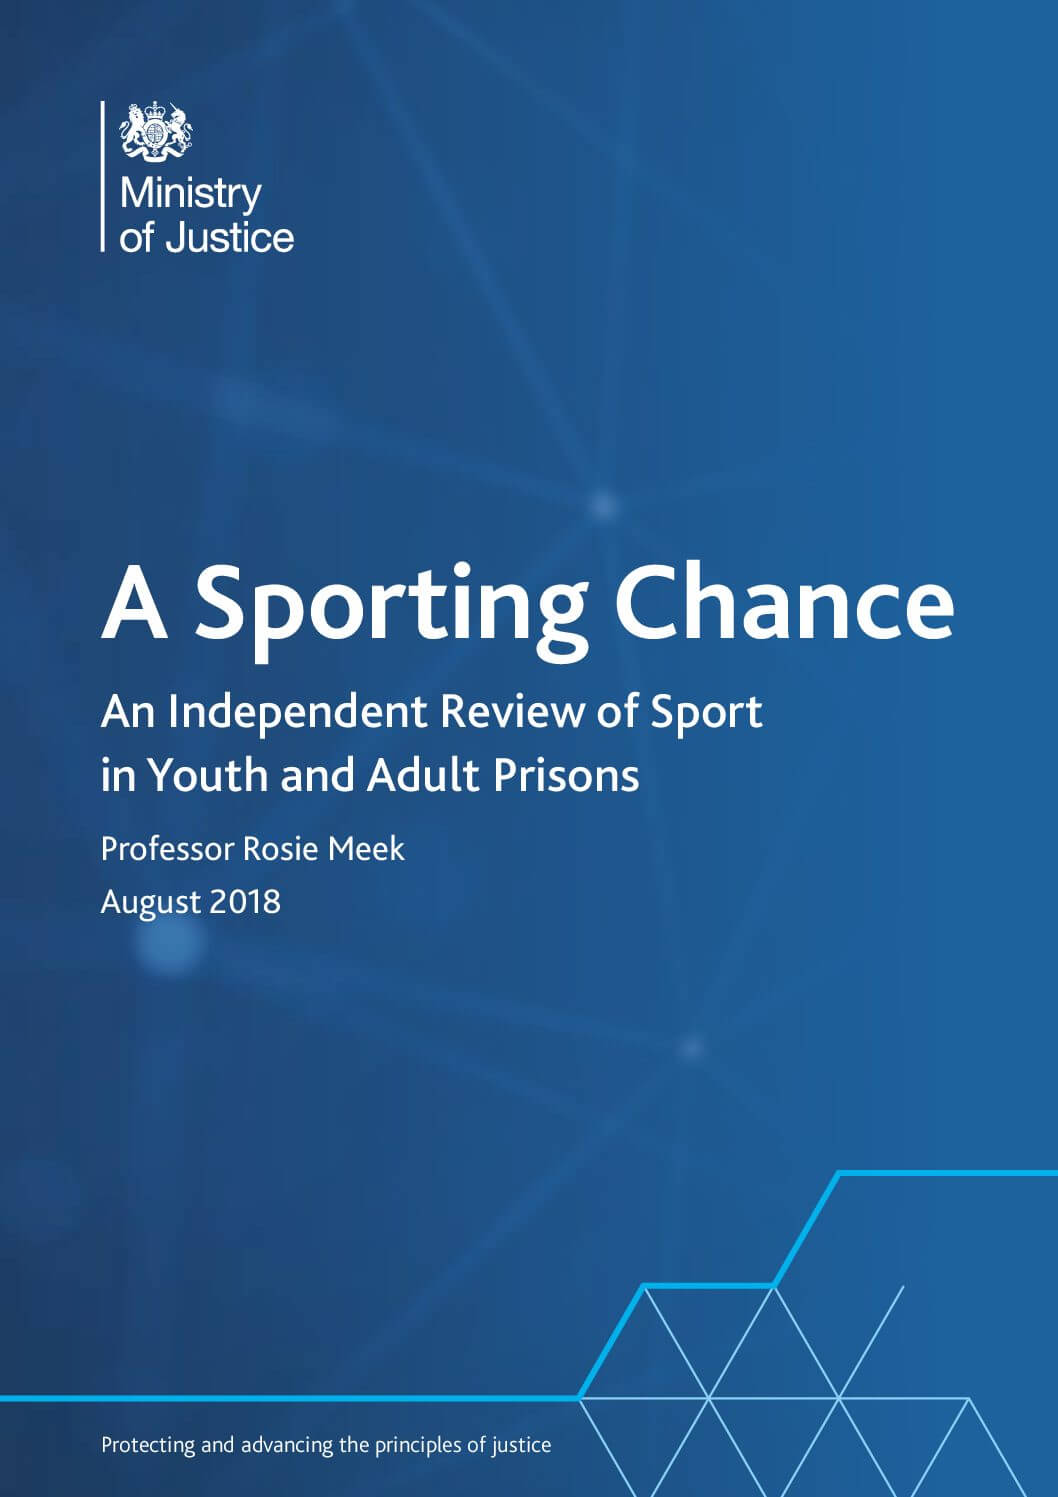 A Sporting Chance – an independent review of sport in youth and adult prisons